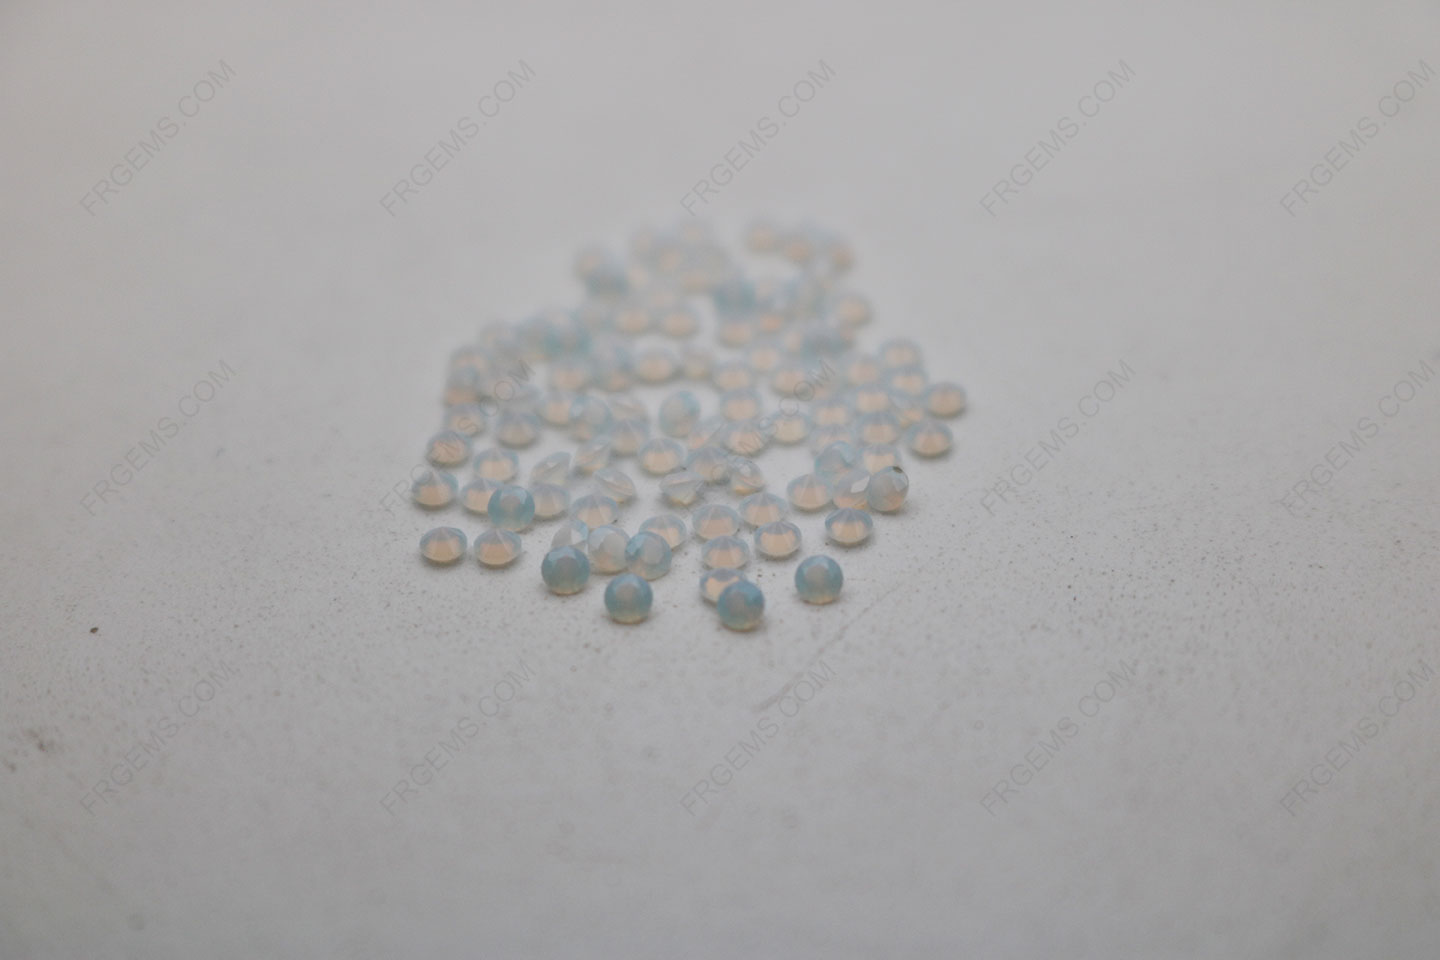 Nano Crystal Opal White Yellow 202# Diamond faceted cut 2mm stones IMG_4931